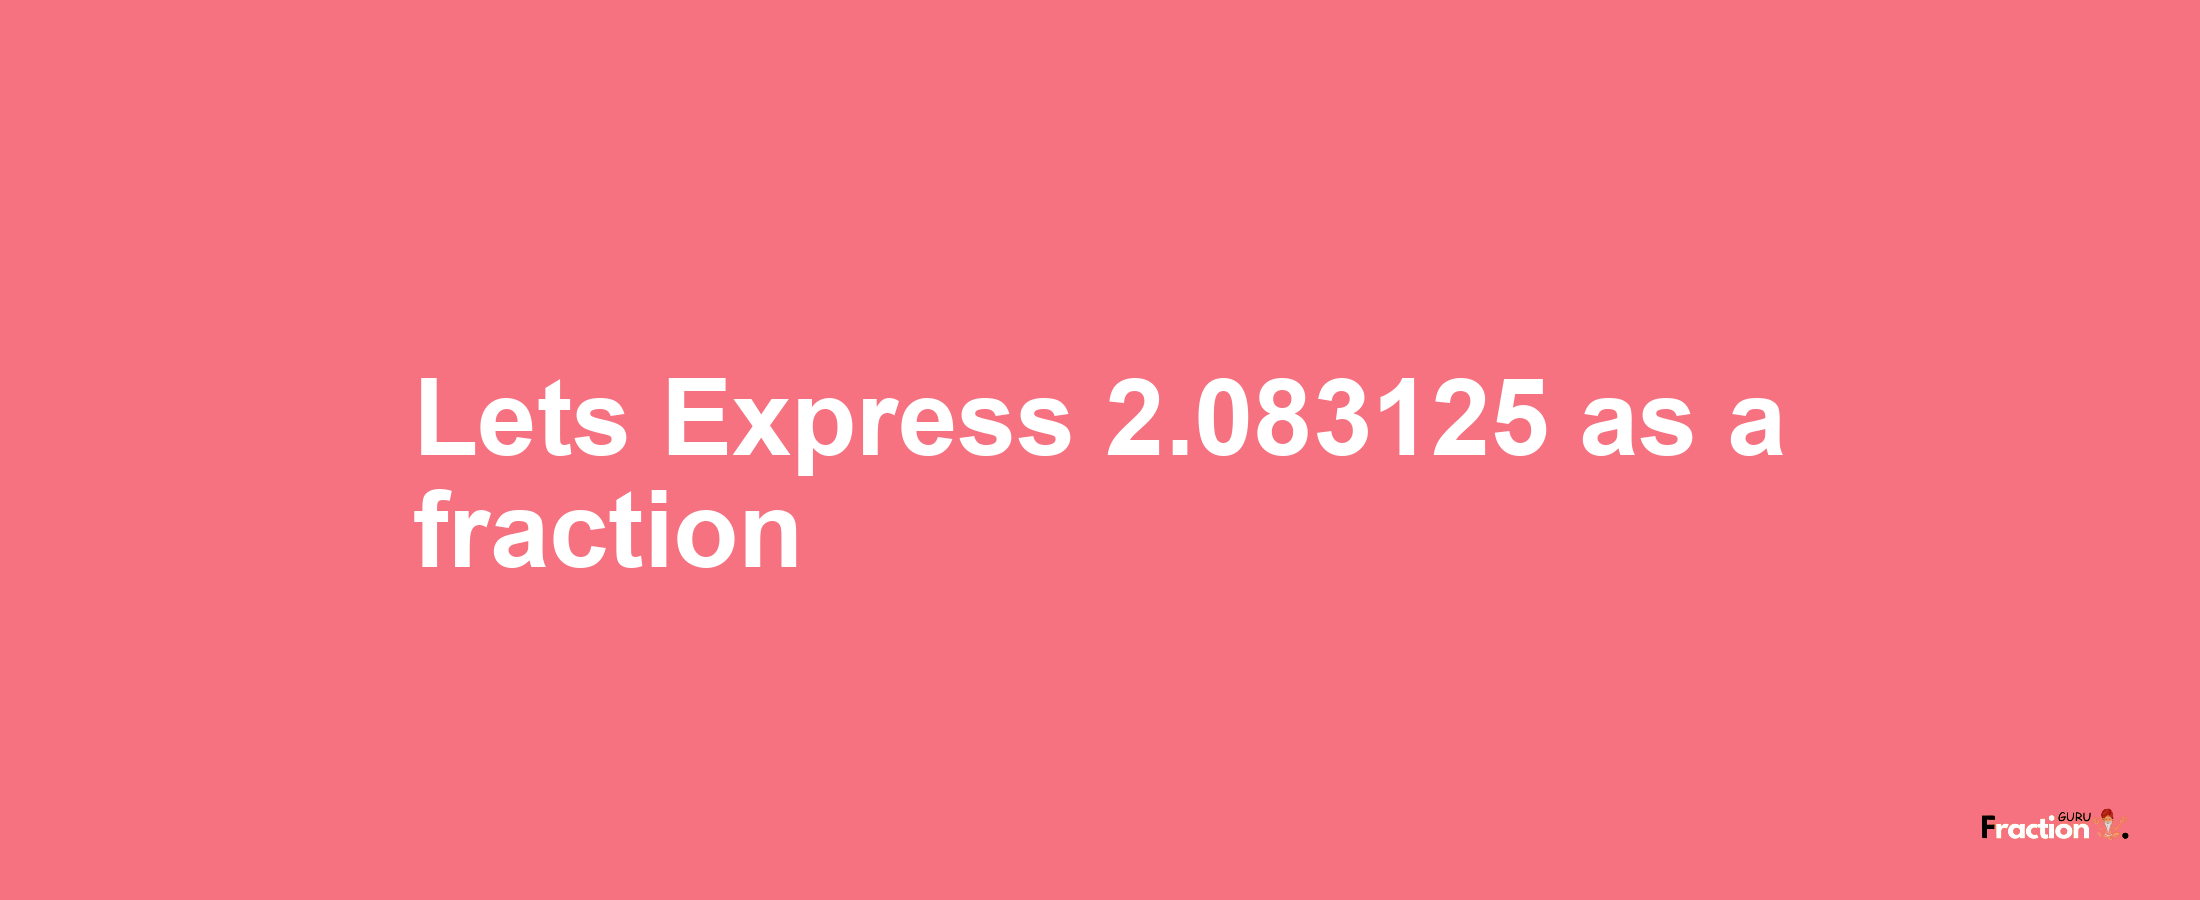 Lets Express 2.083125 as afraction